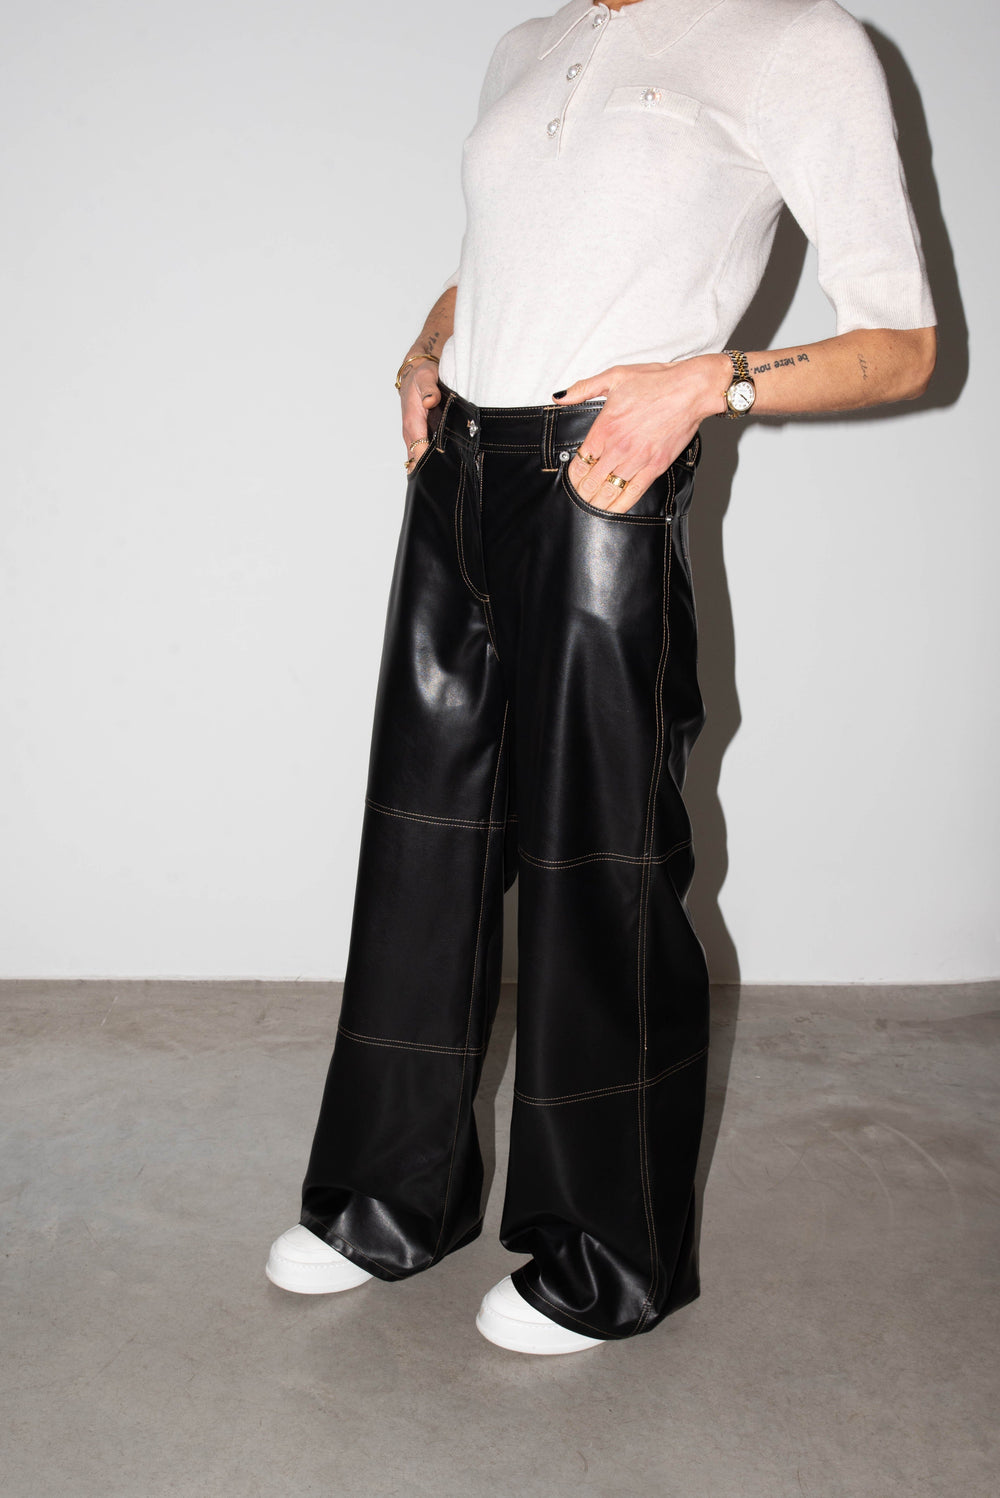 BAILEE RELAXED FIT FAUX LEATHER PANTS PANTS STAND STUDIO 